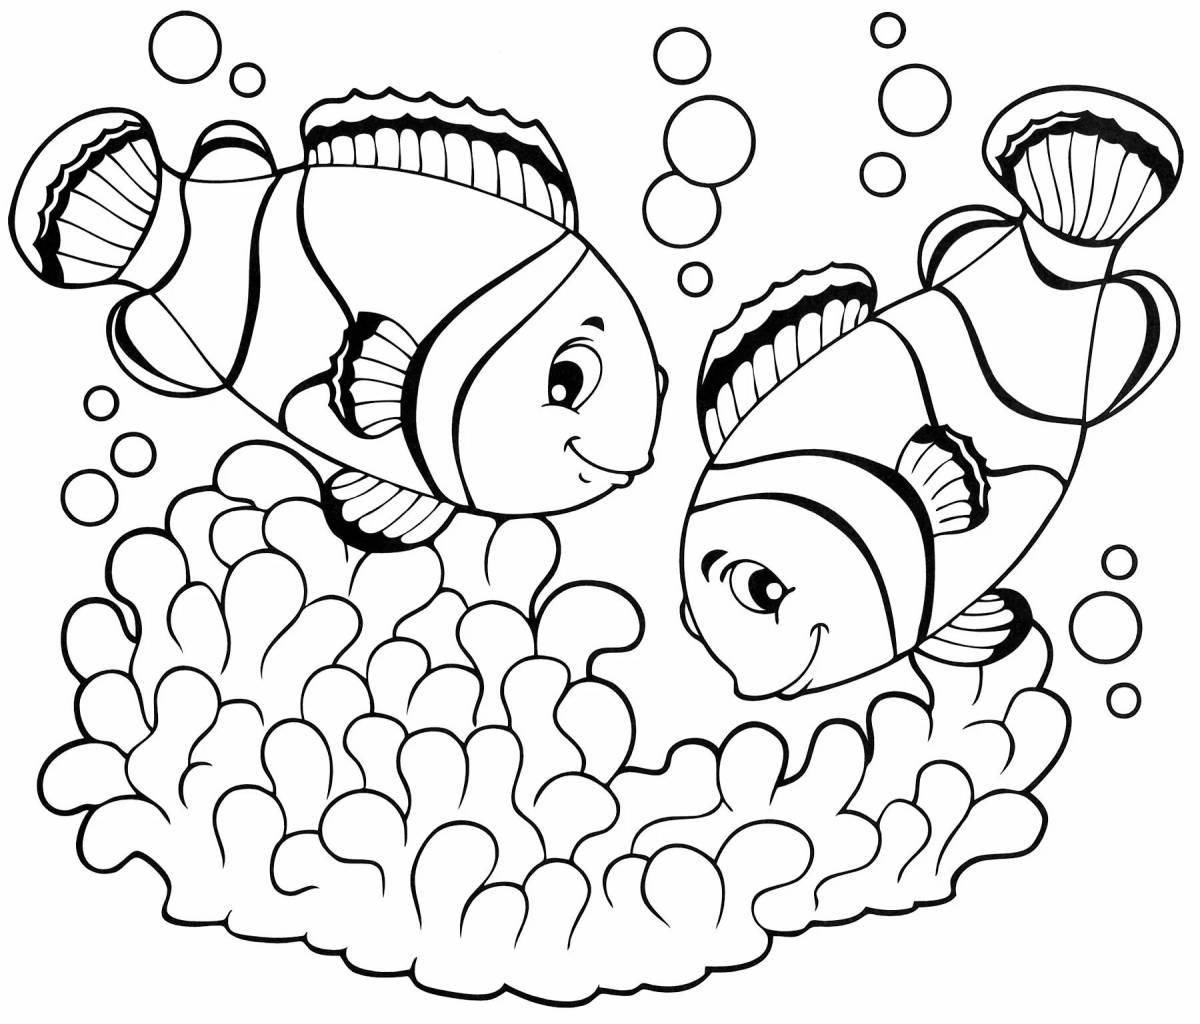 Gorgeous clownfish coloring book for kids